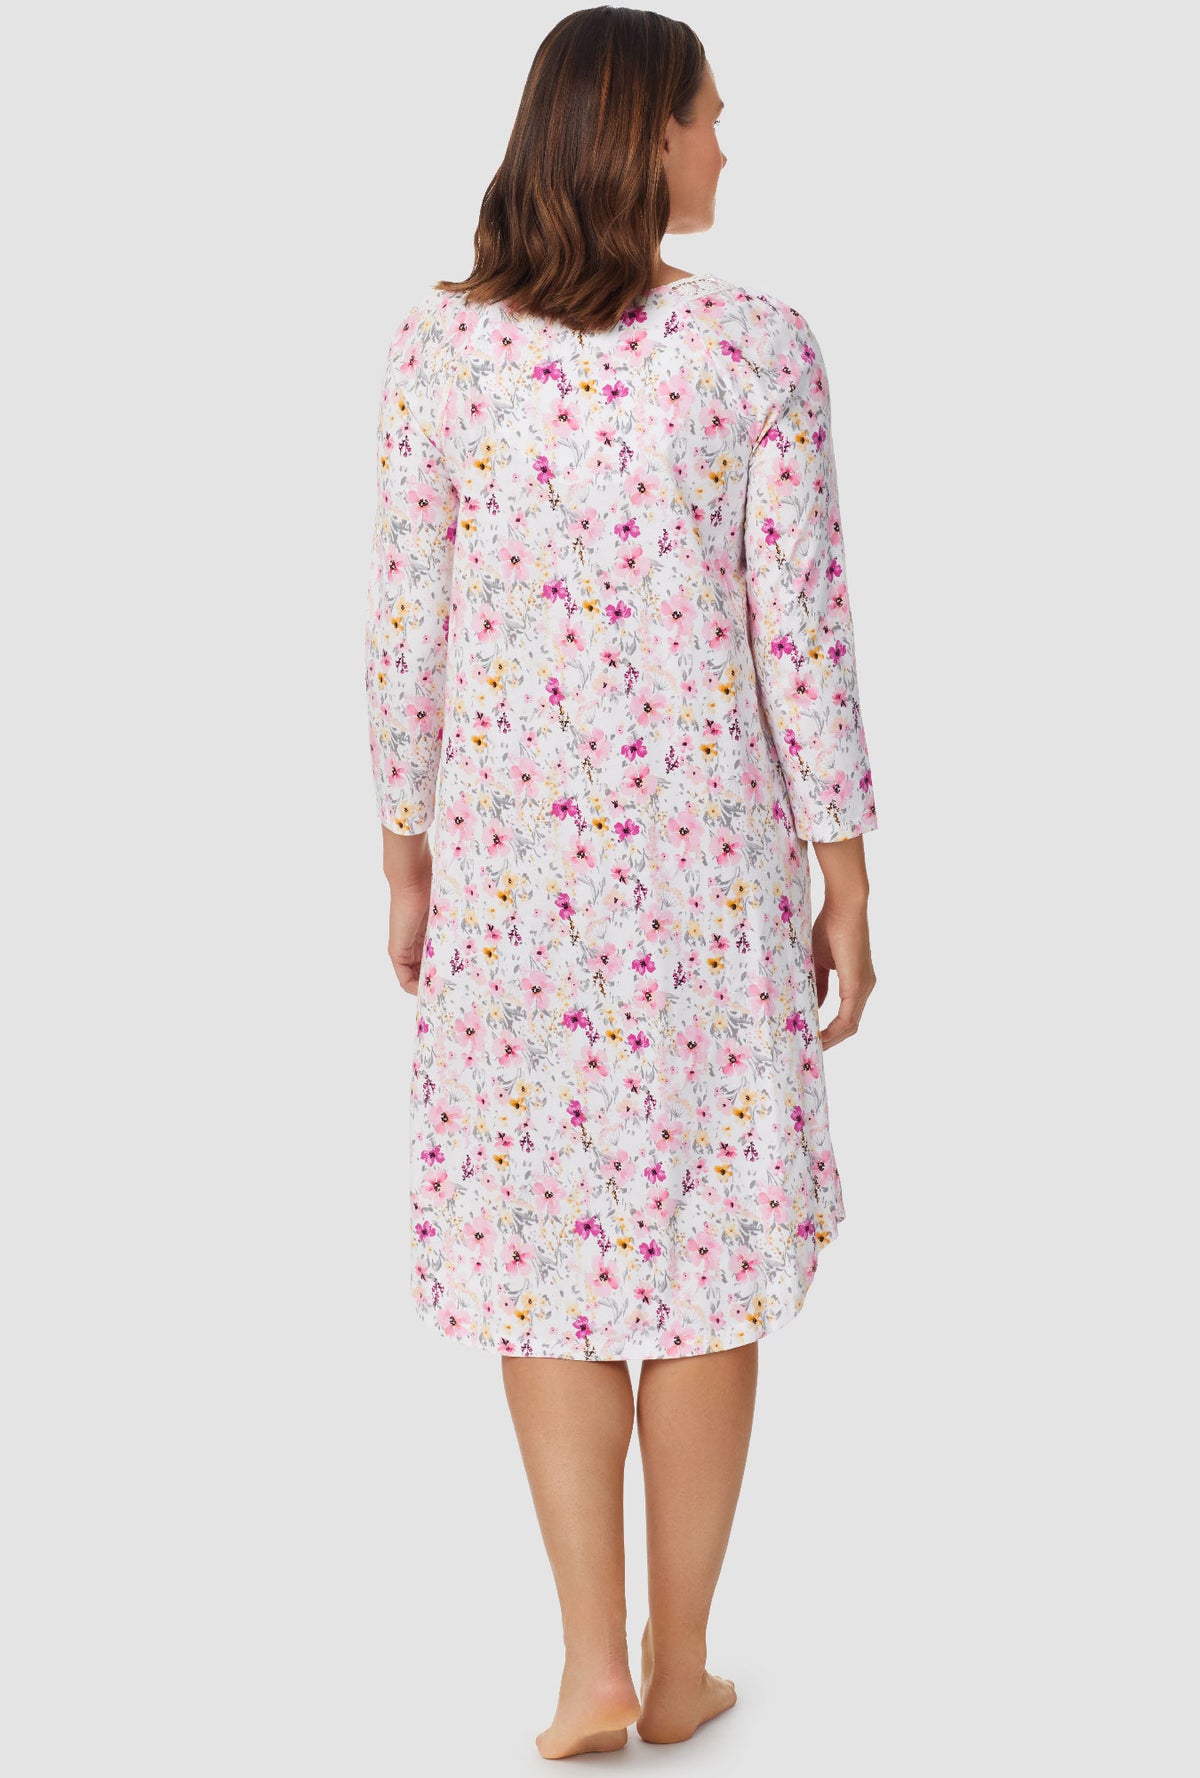 Pink and Magenta Floral 3/4 Sleeve Nightgown